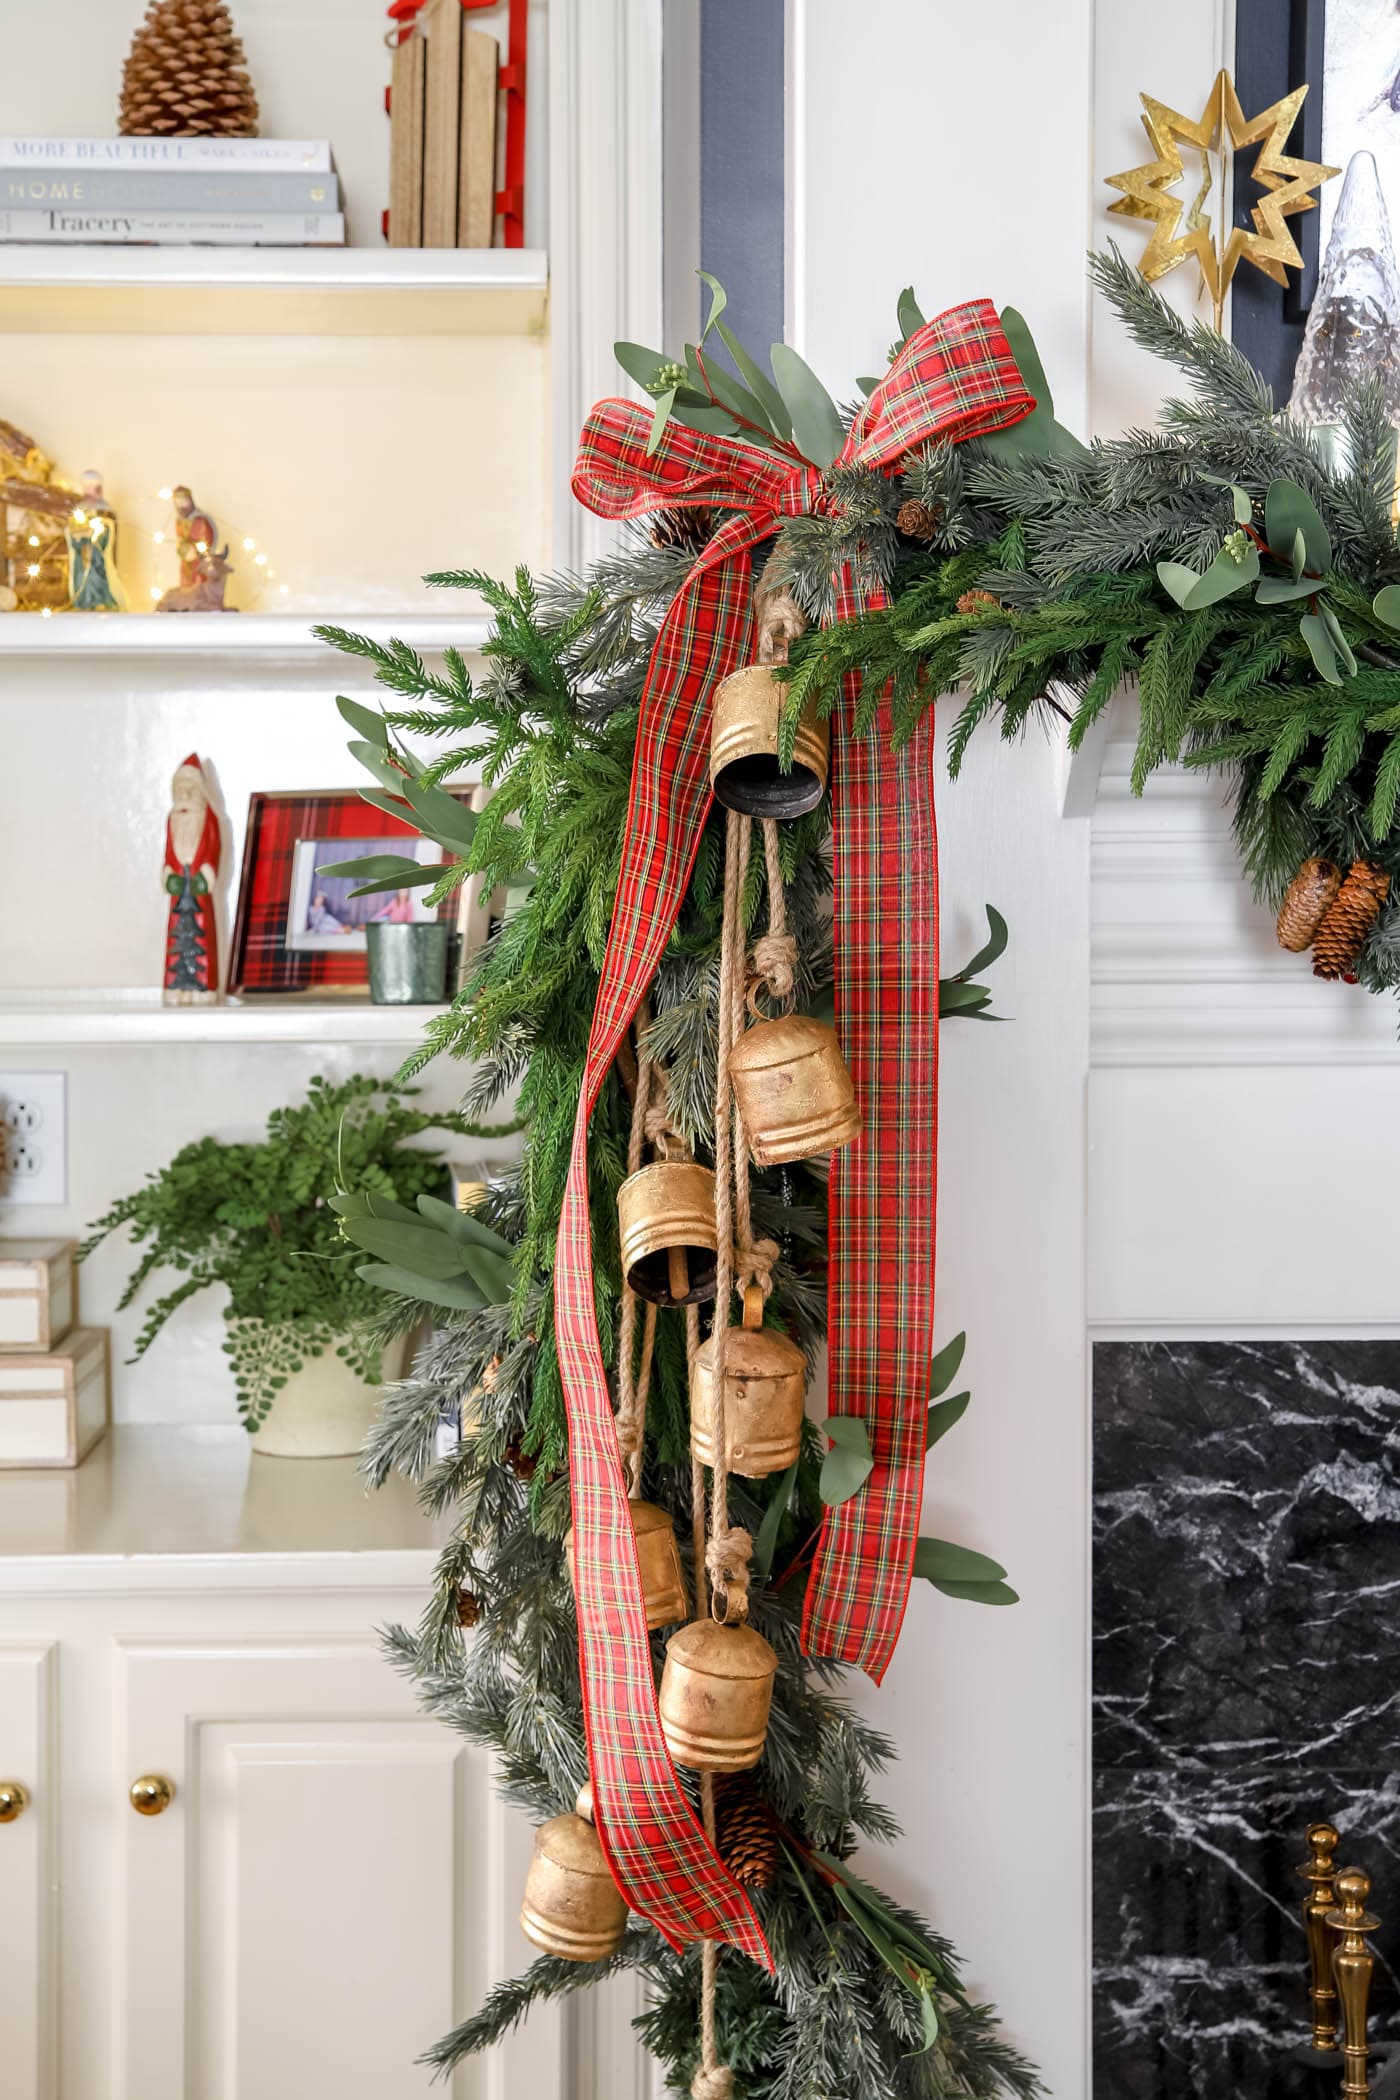 How To Decorate With Christmas Bells (7+ Must-Try Ideas)